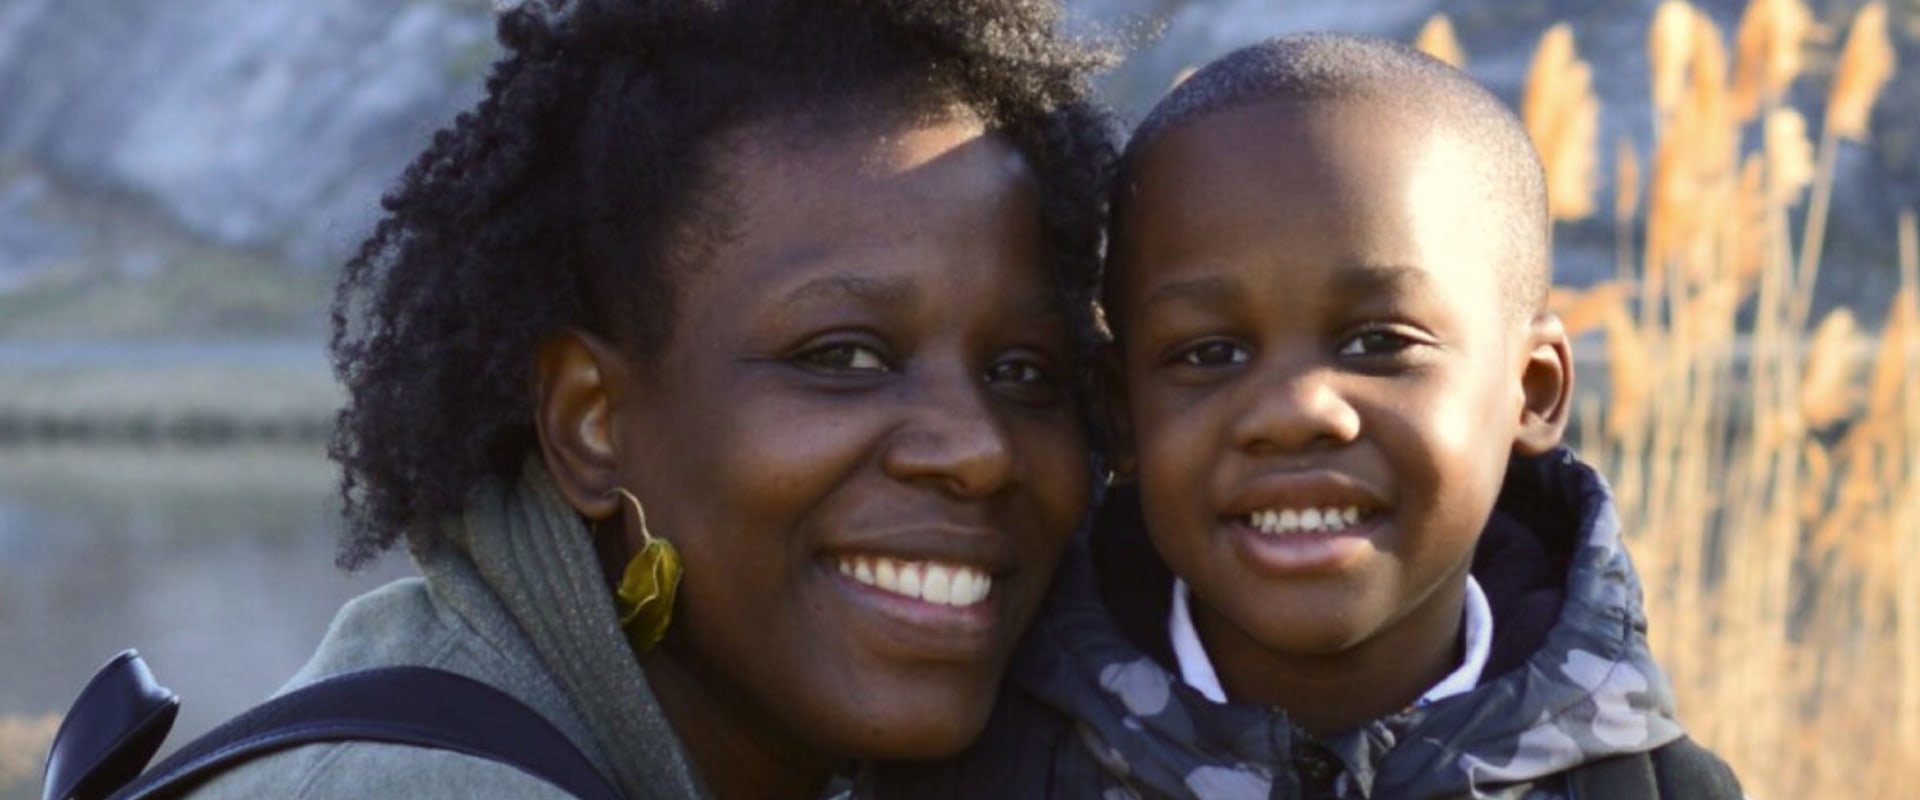 Finding Resources for Families of Children with Special Needs in Bronx, New York